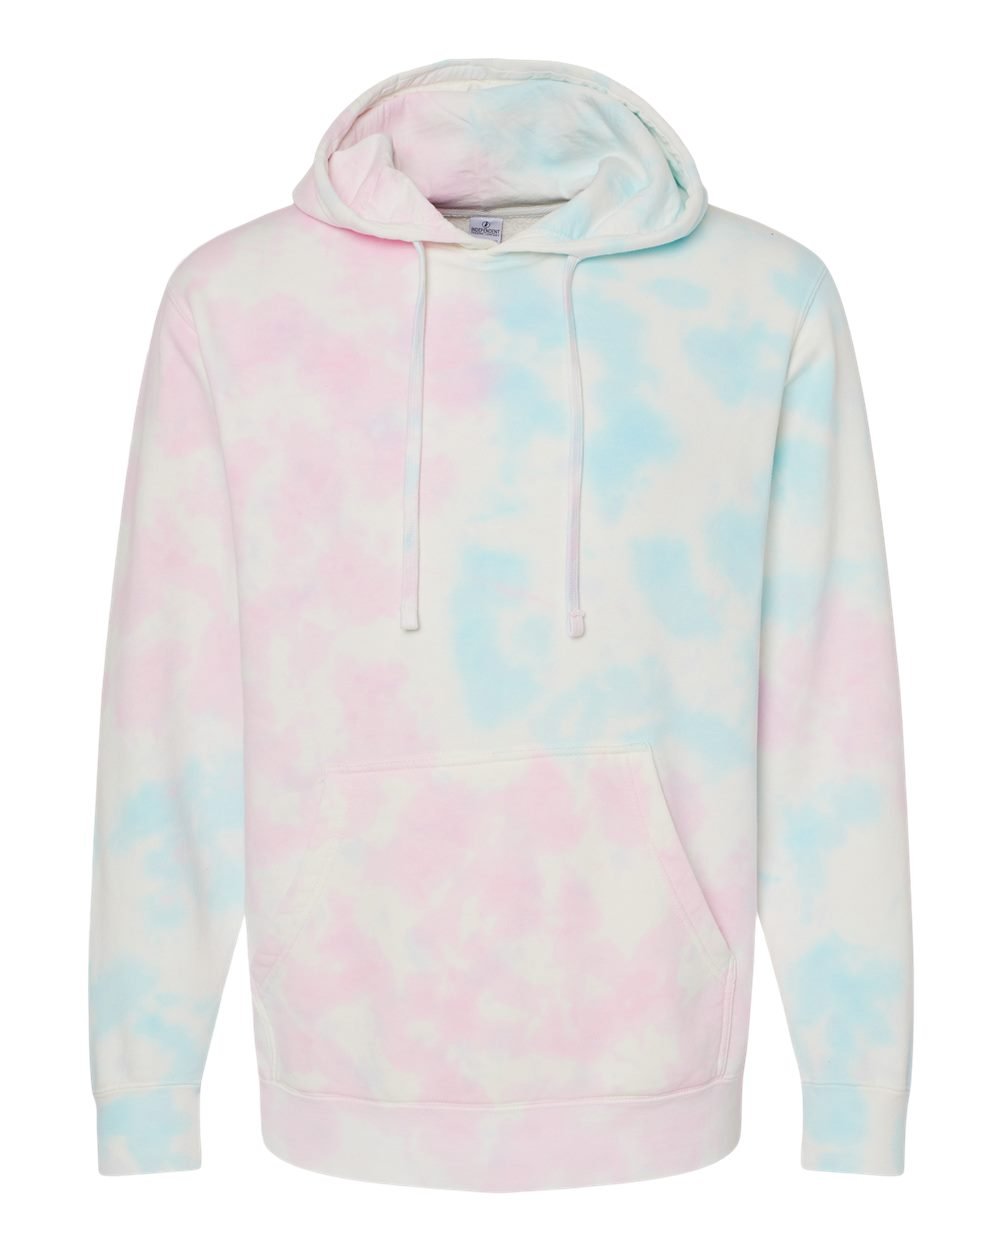 Independent_Trading_Co._PRM4500TD_Tie_Dye_Cotton_Candy_Front_High.jpg